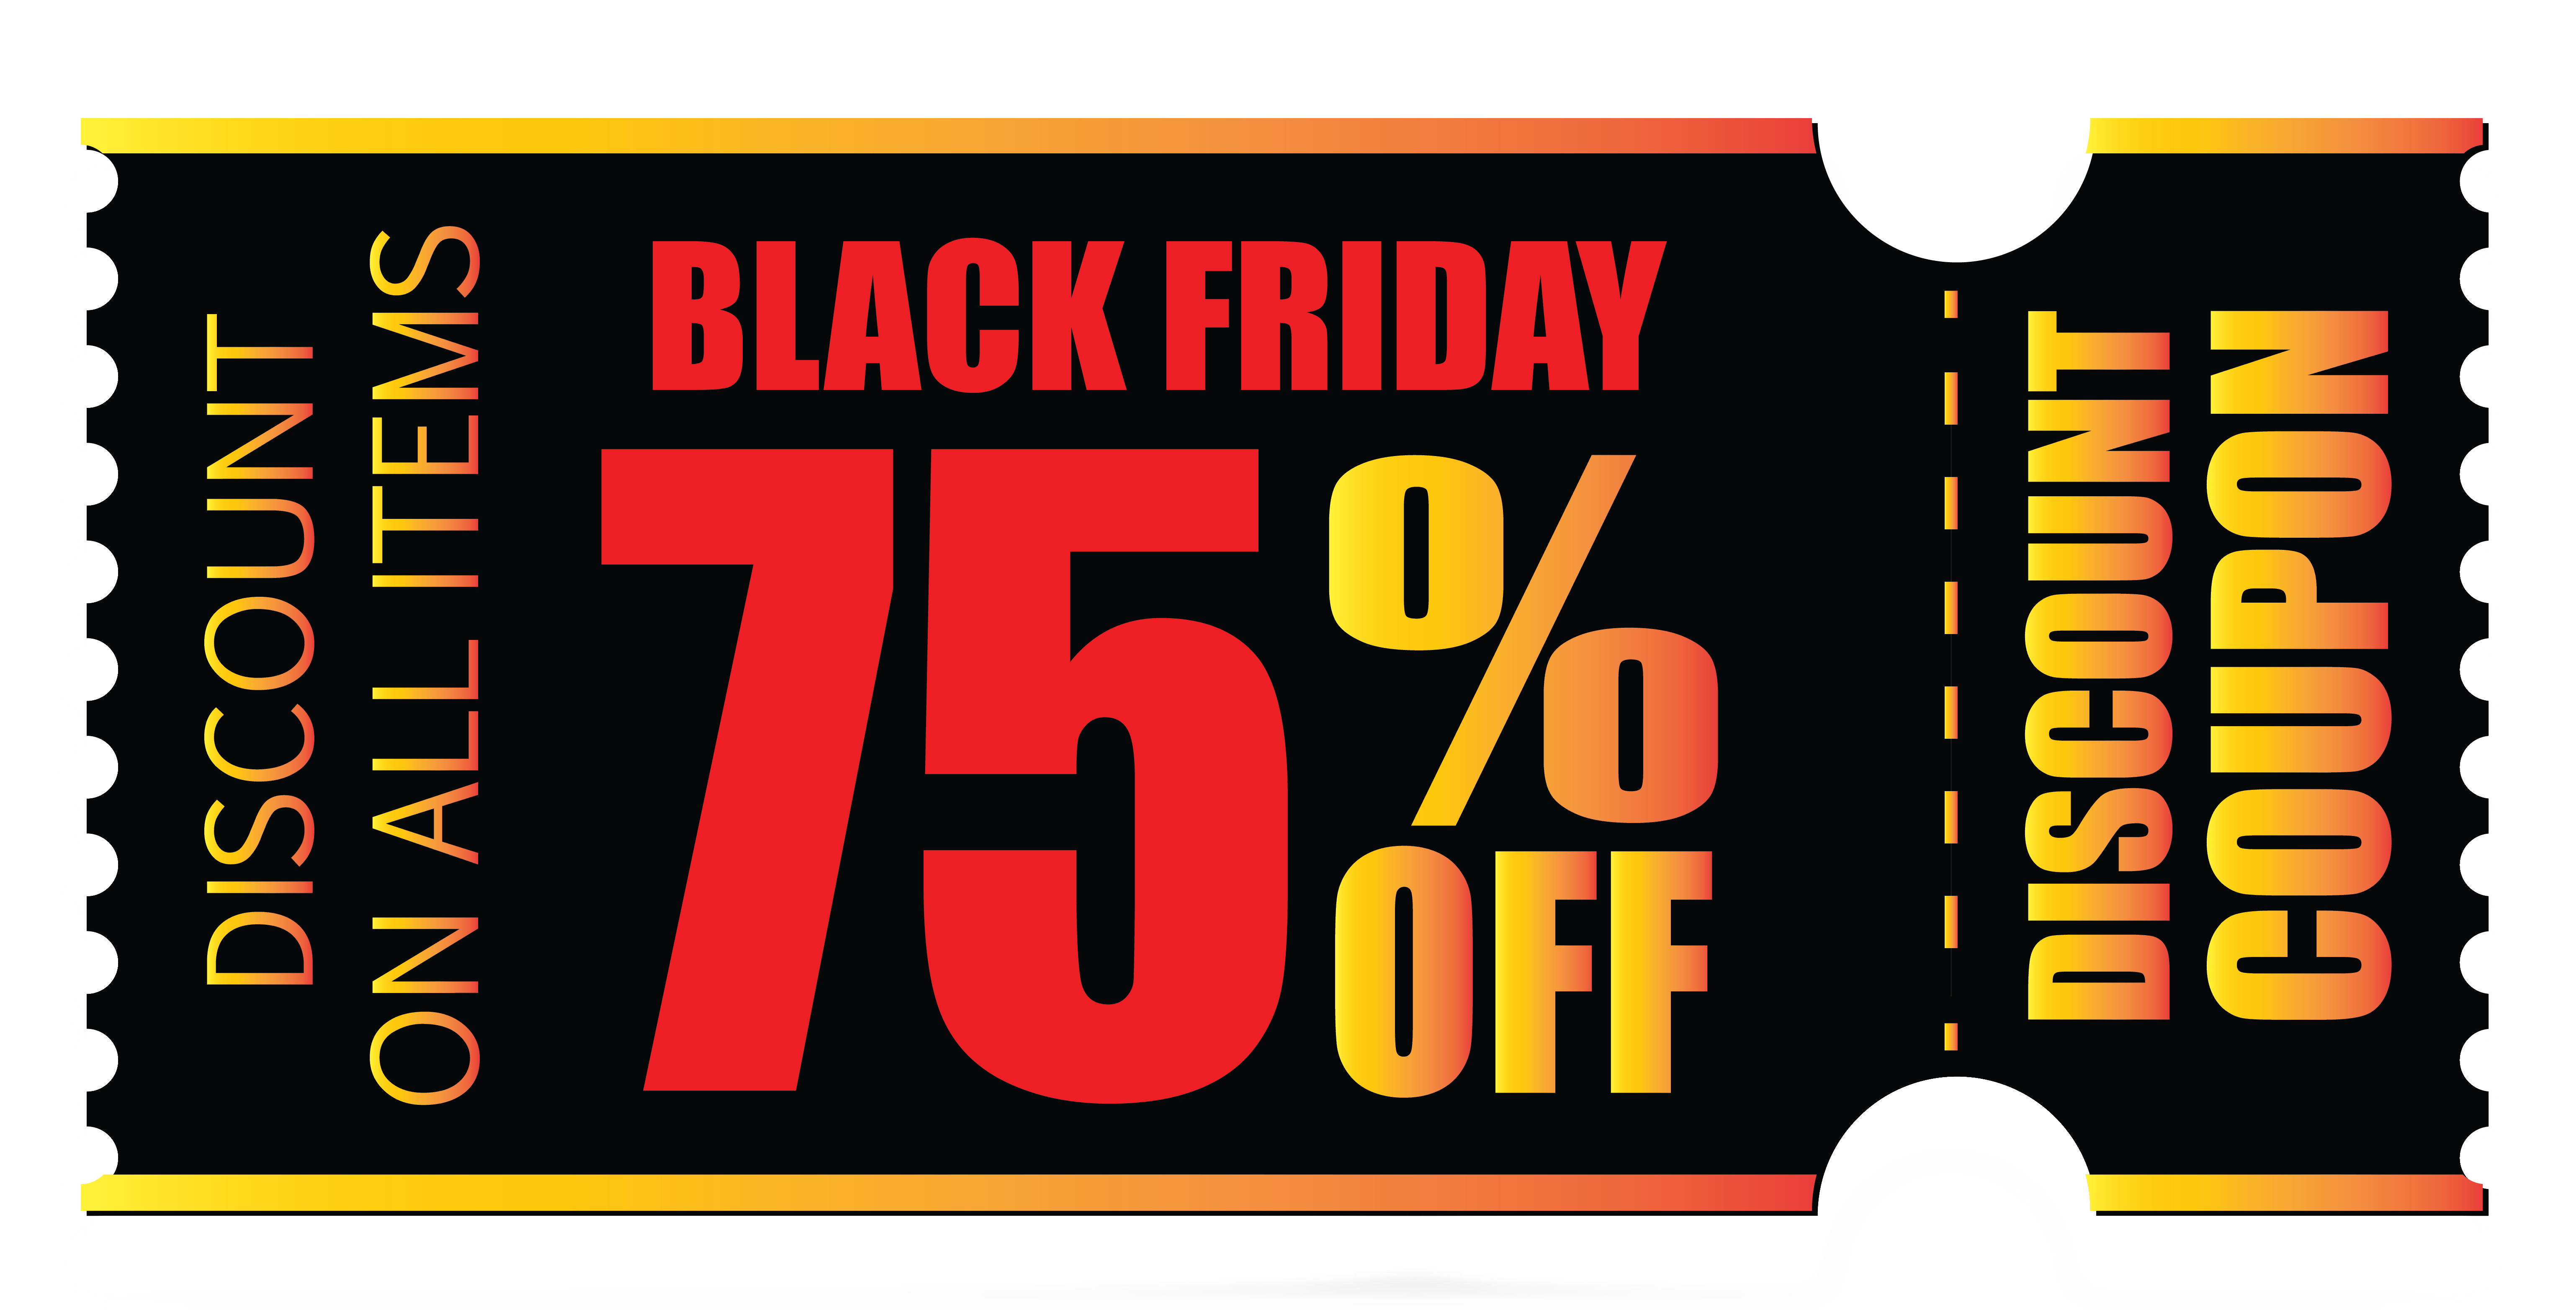 Black Friday Coupon PNG Clipart Image | Gallery Yopriceville - High-Quality Images and ...